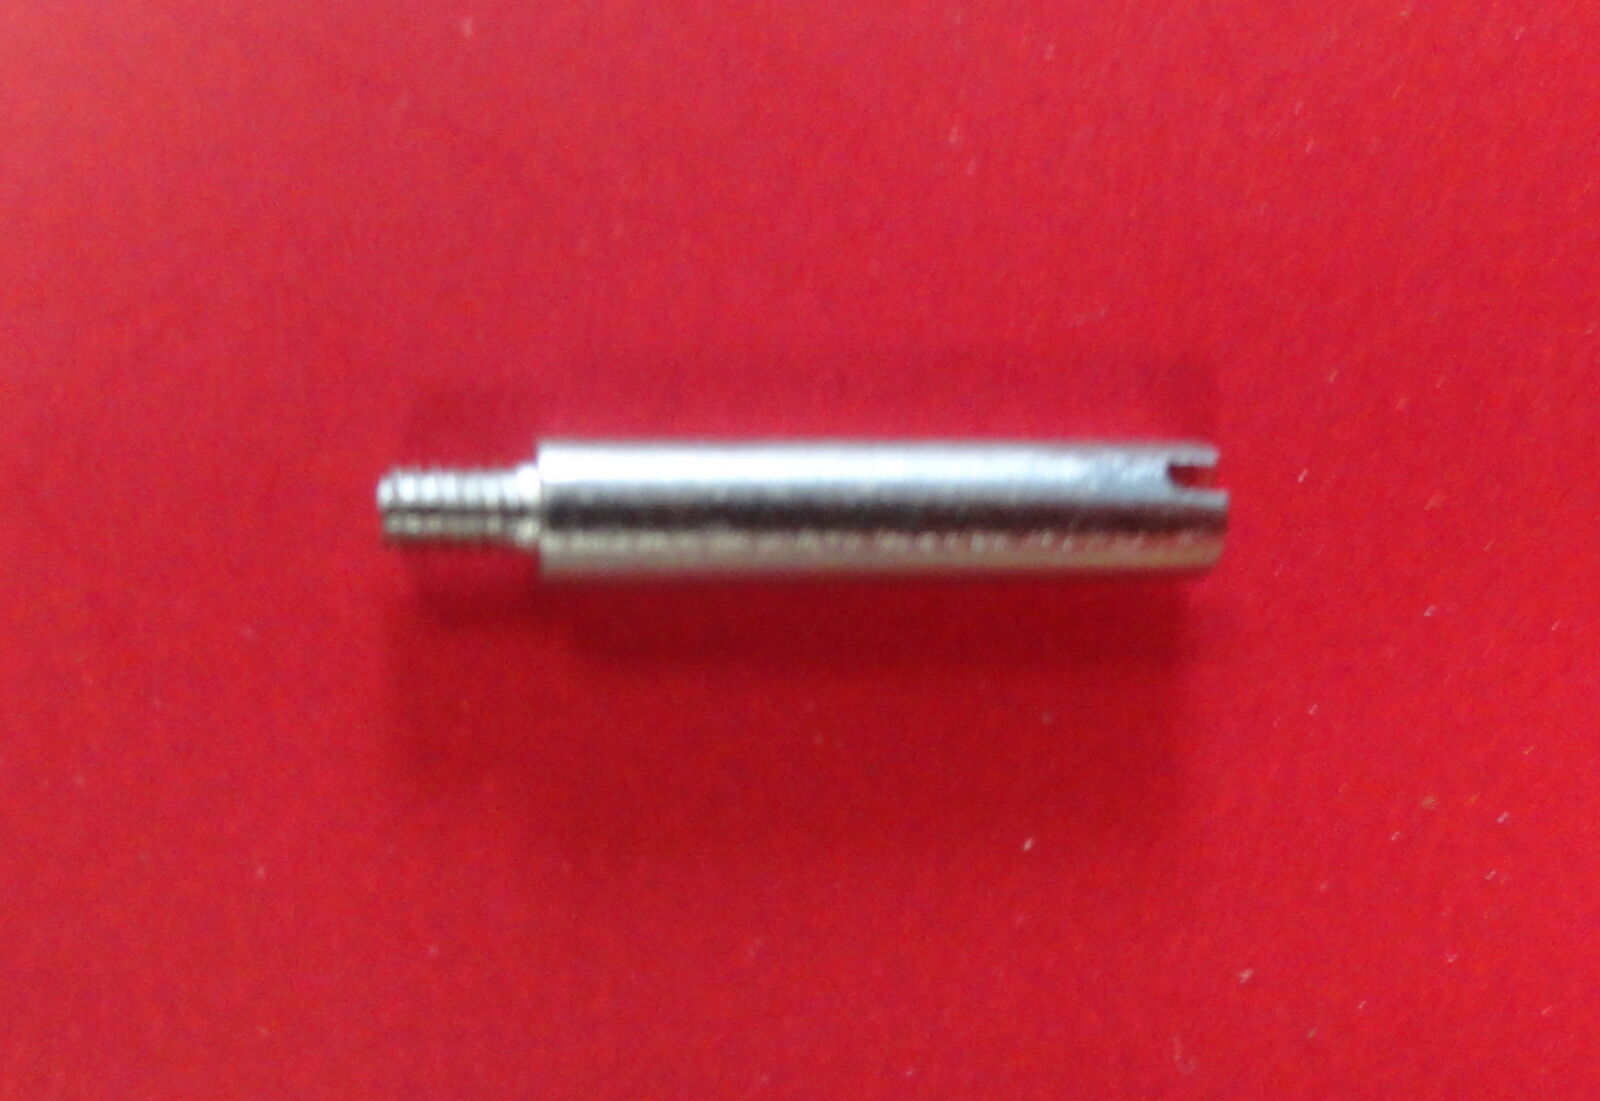 AN-6530/ B-7 FLYING GOGGLES CENTER PIN/SCREW